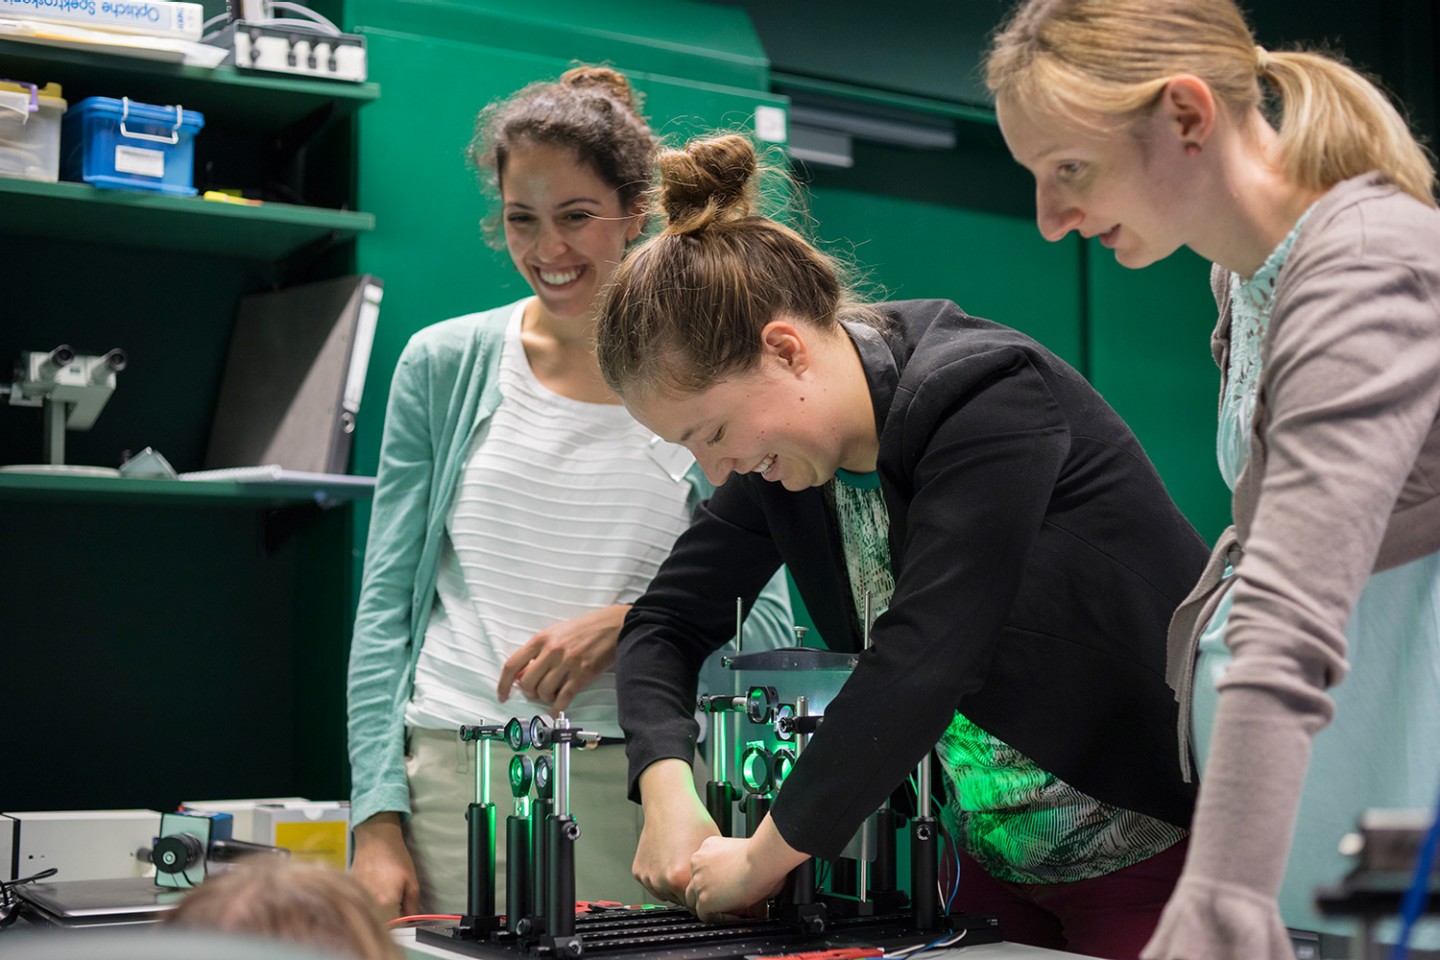 Three smiling women adjust an adaptive optics device at the Fraunhofer IOF at the Science Campus 2016.